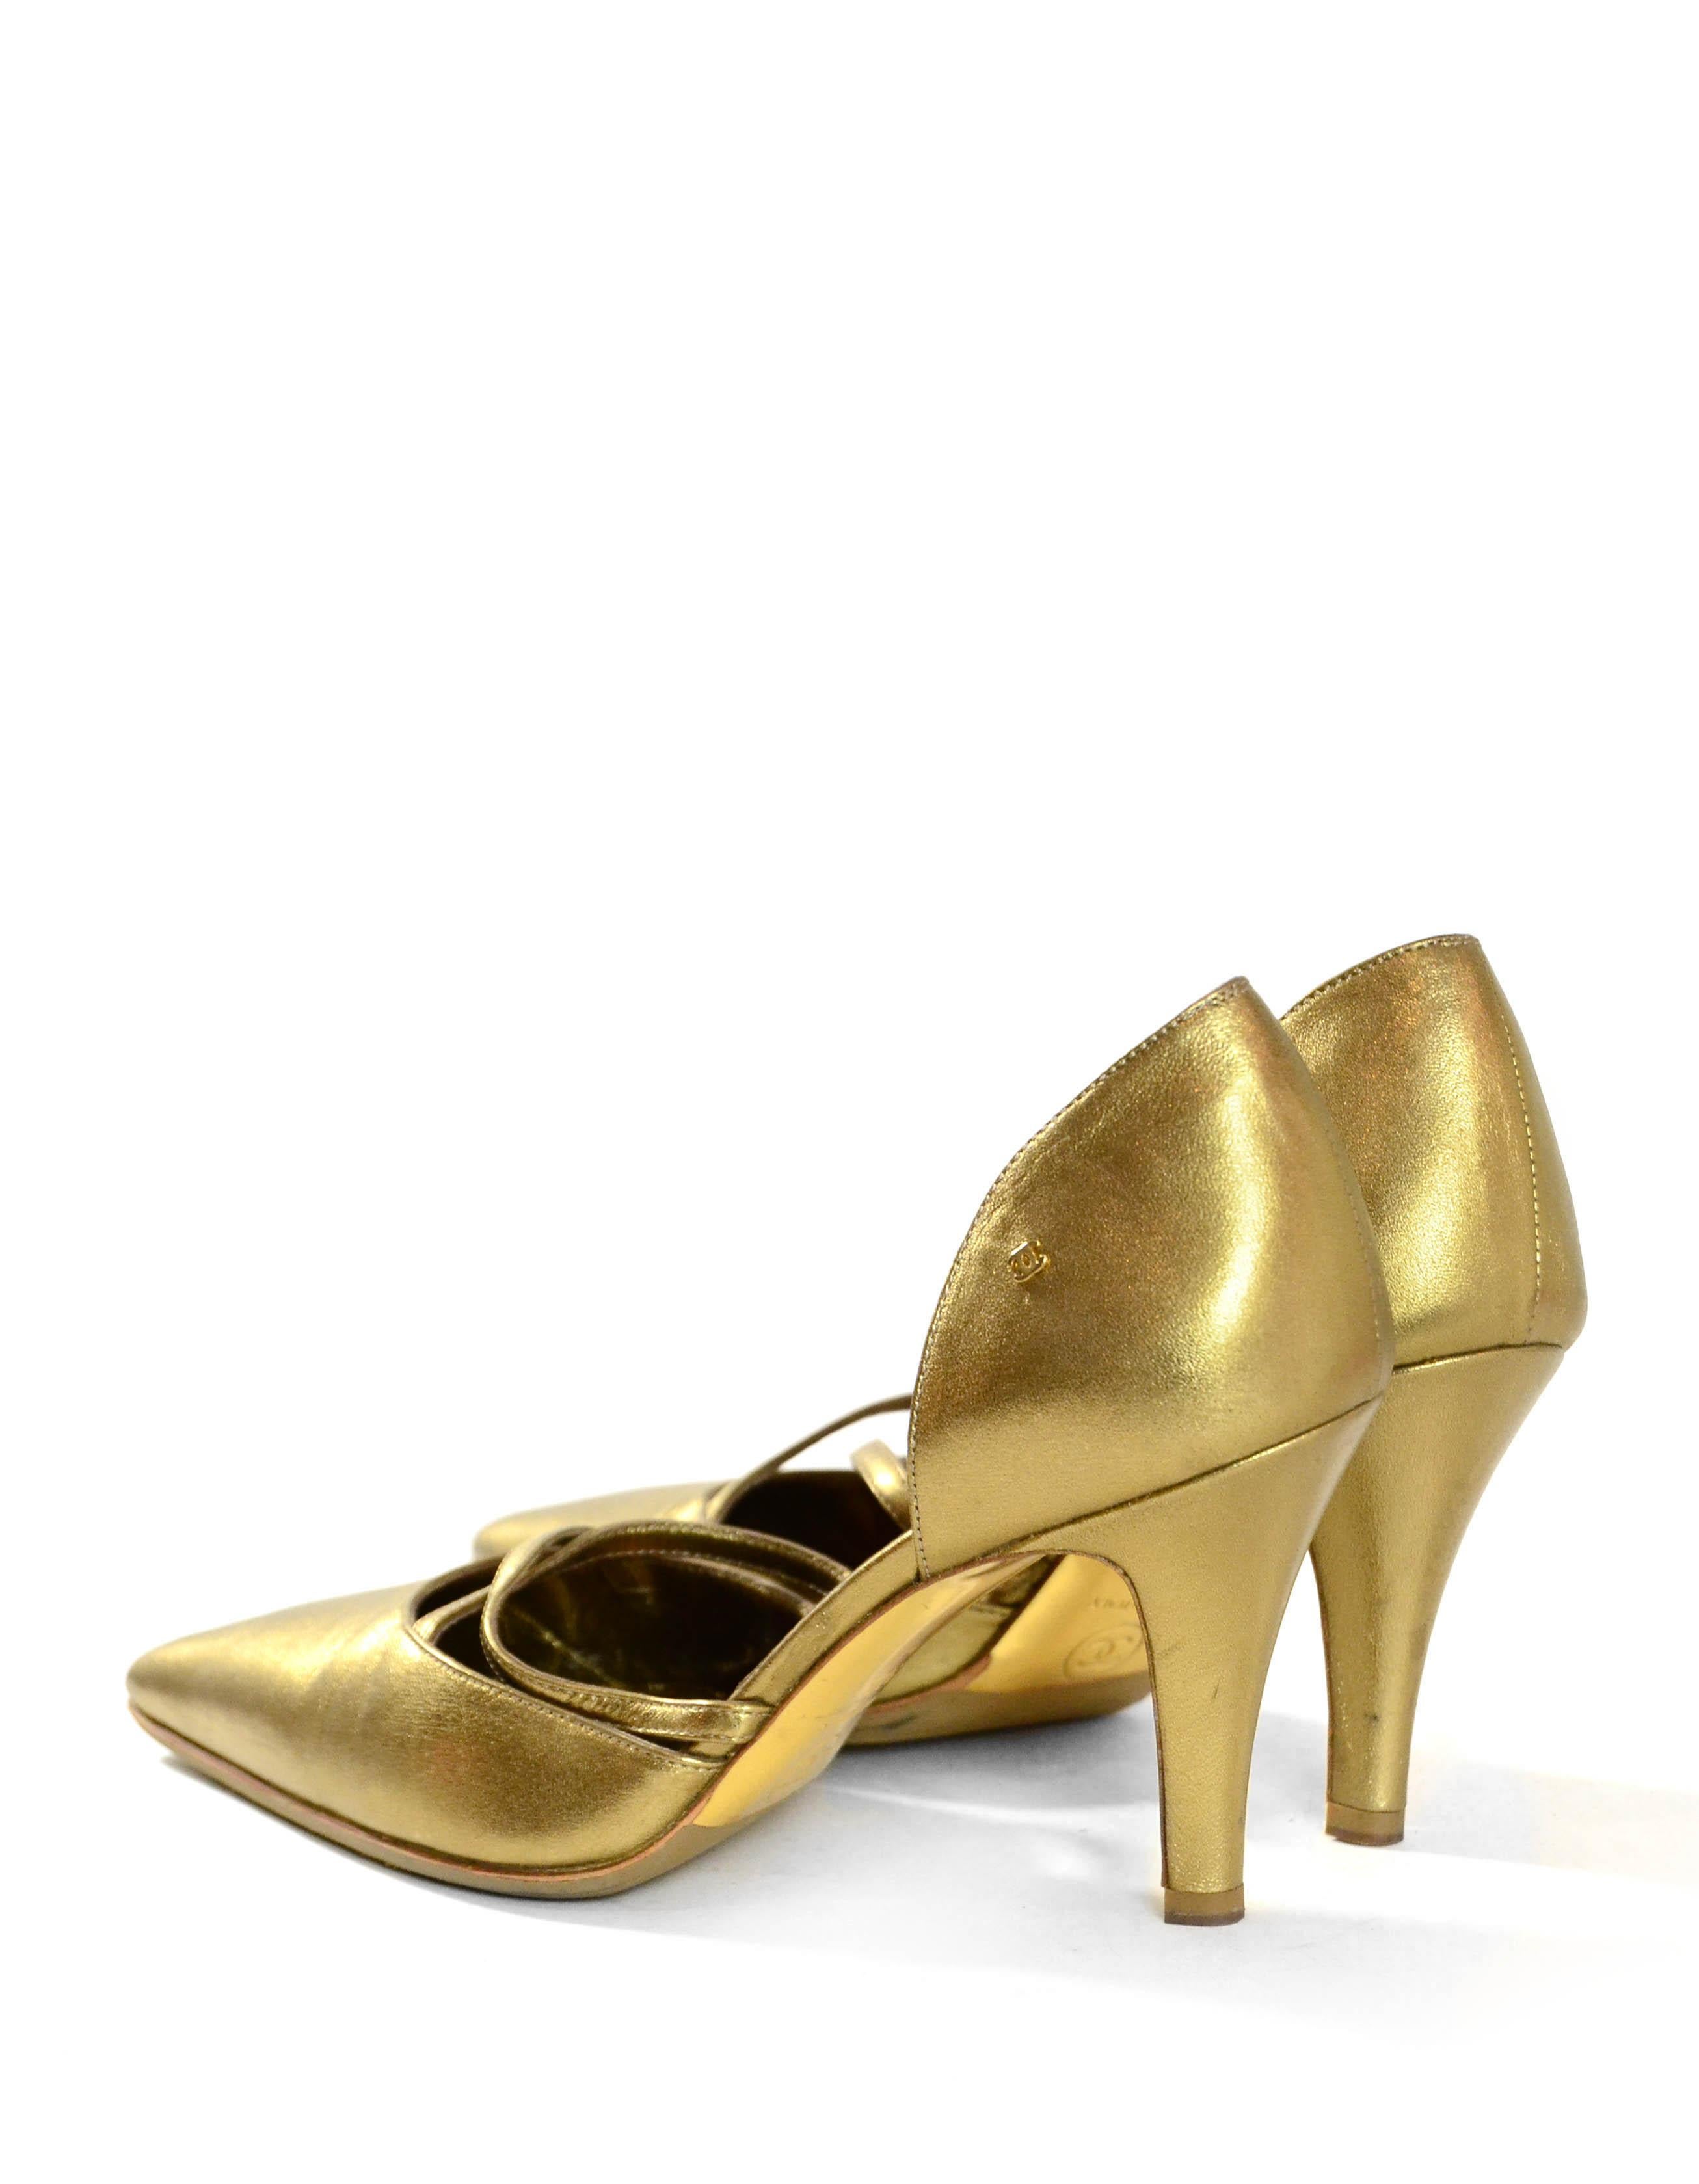 Brown Chanel Gold Leather Pointy Toe Pumps sz 37.5